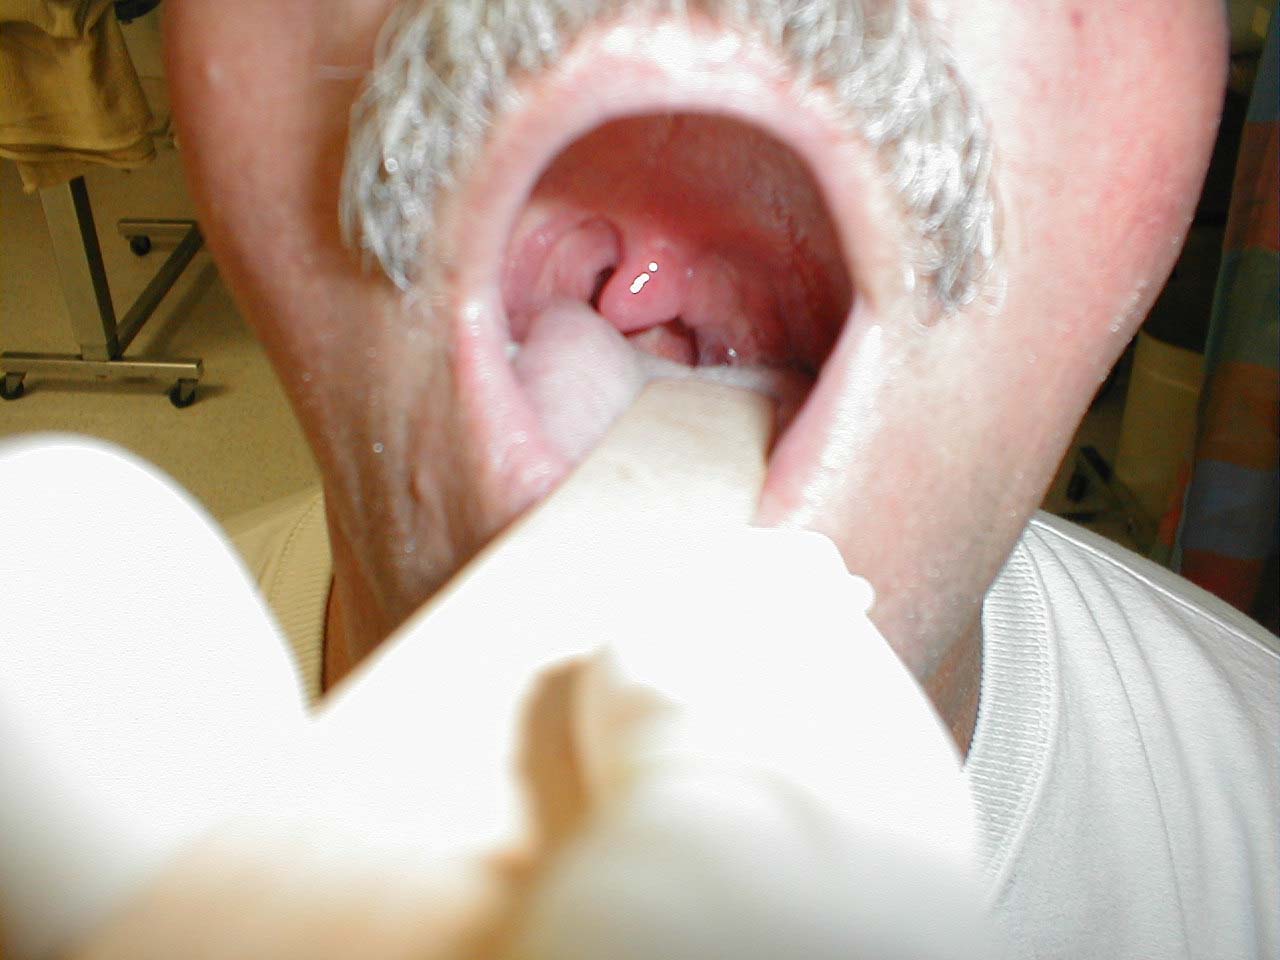 Left peritonsillar abscess; infection within left tonsil has pushed uvula towards the right.